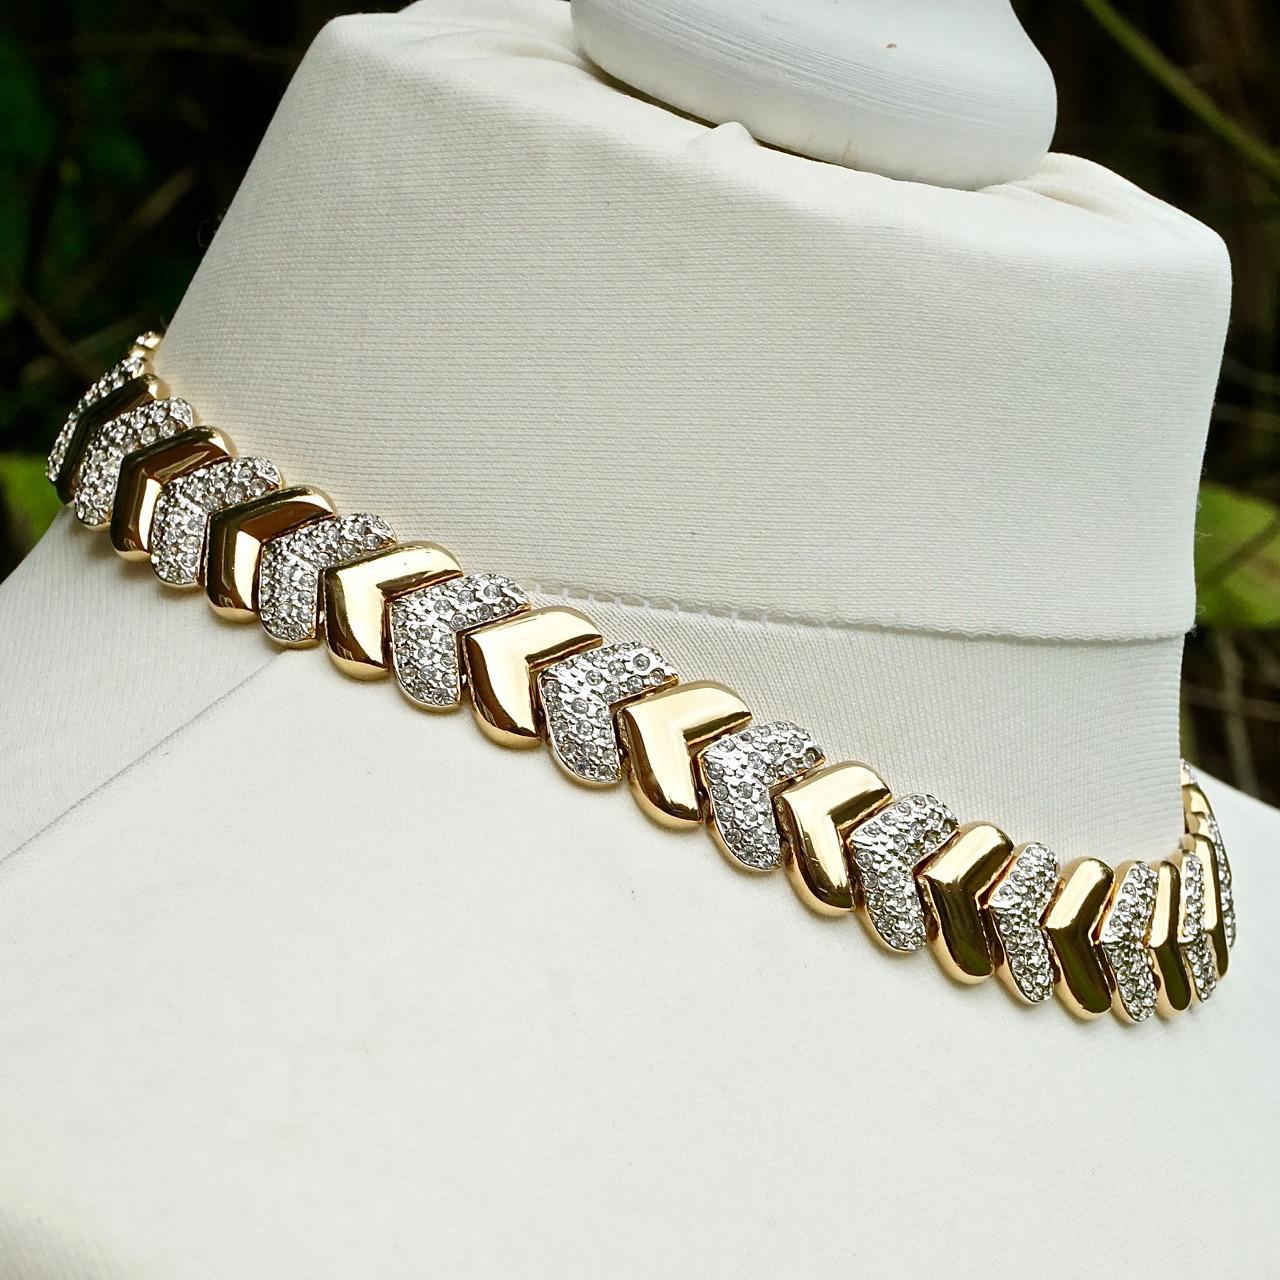 Gold Plated and Rhinestone Heavy Chevron Collar Necklace circa 1980s For Sale 4